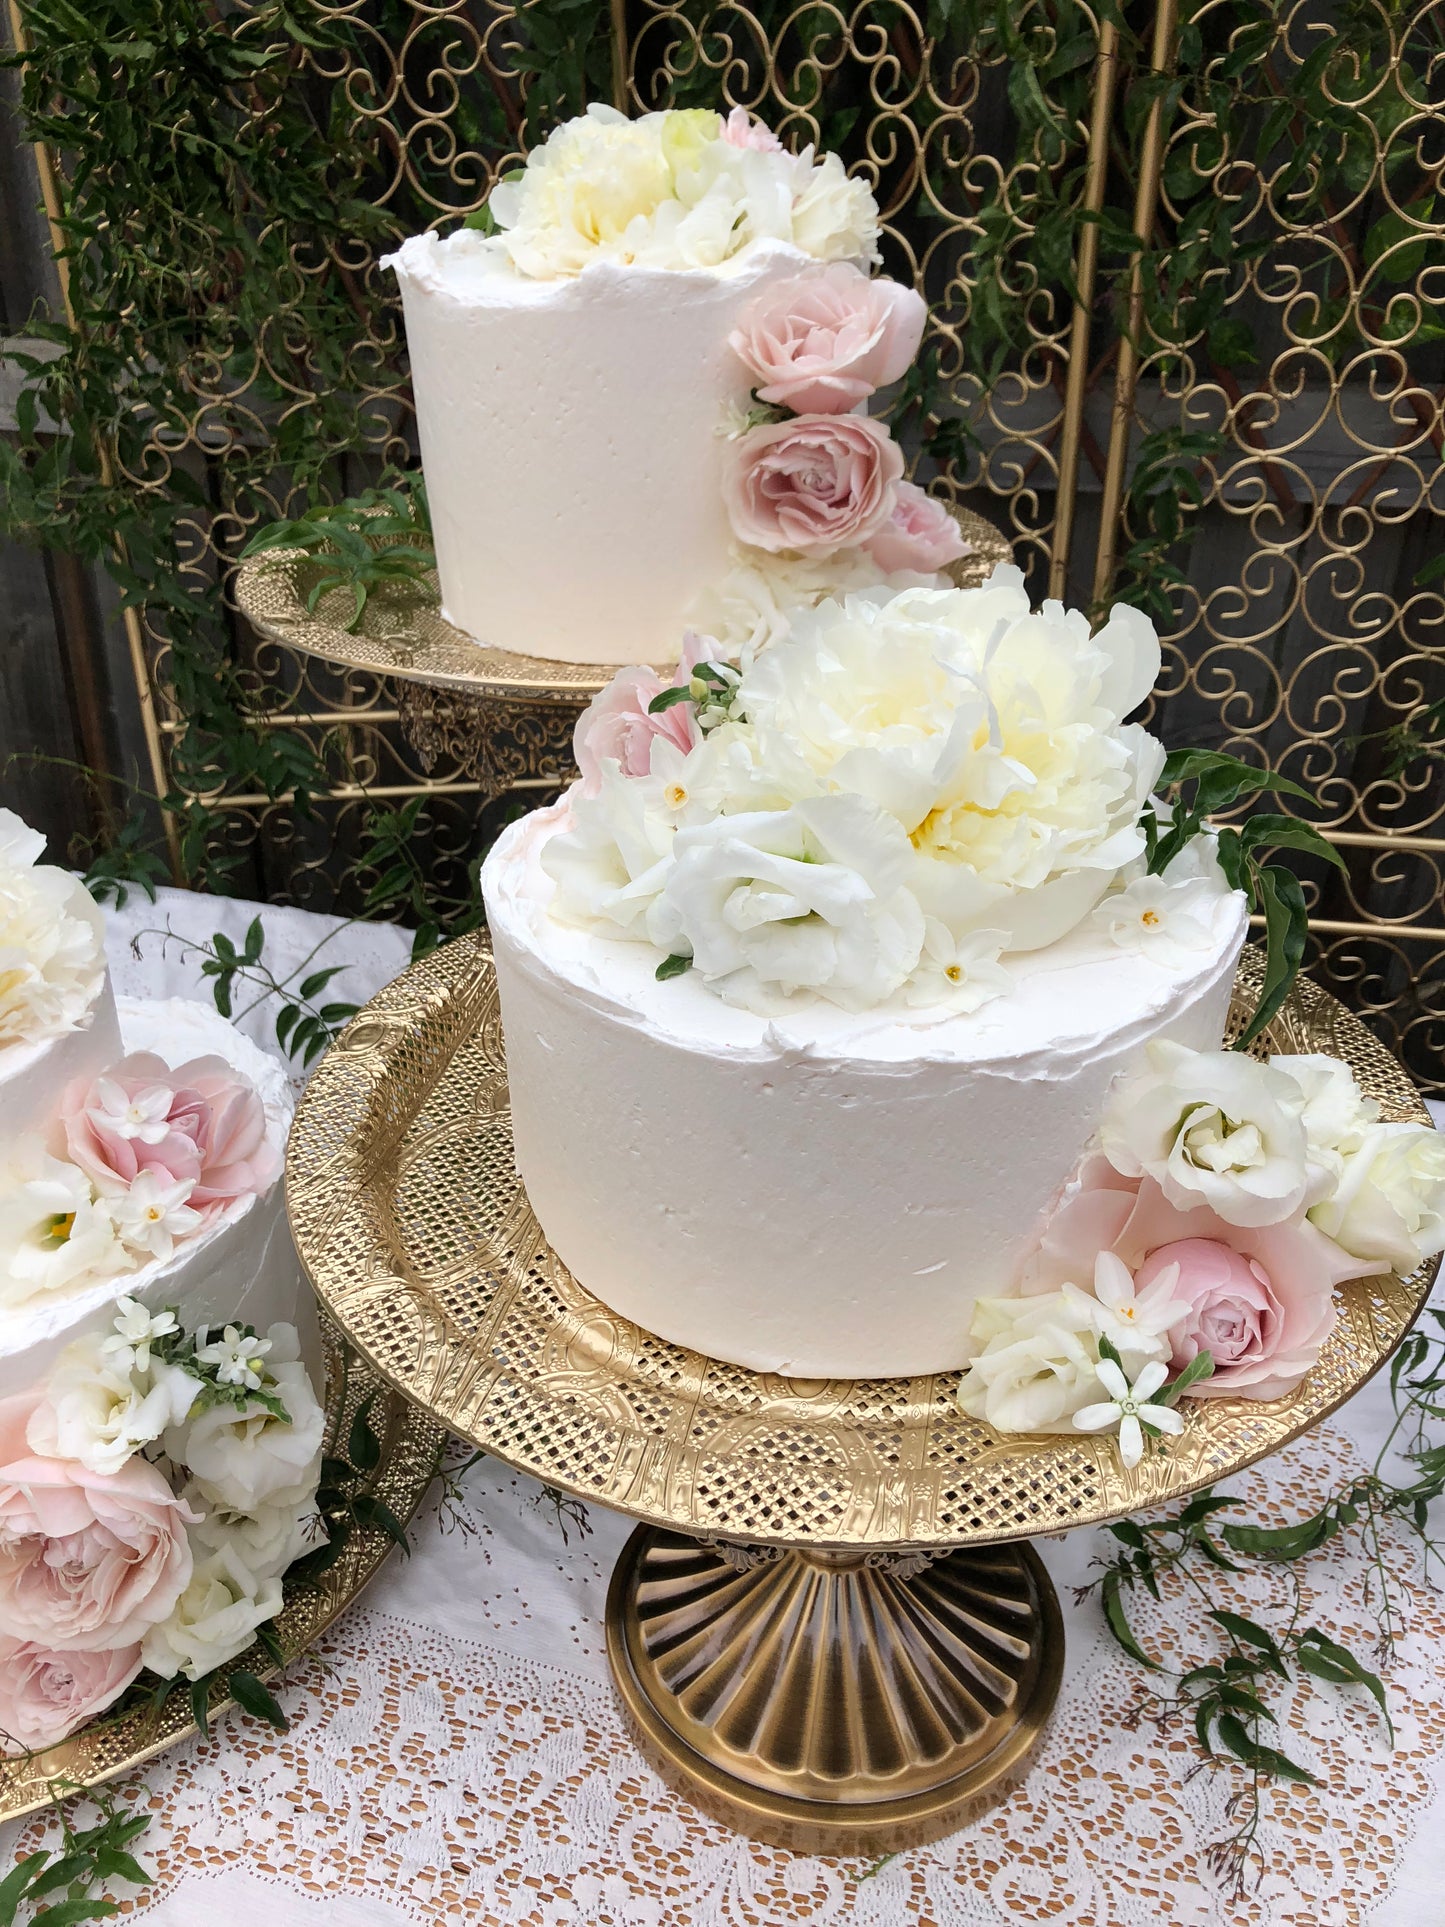 Royal Cake Buffet With Roses